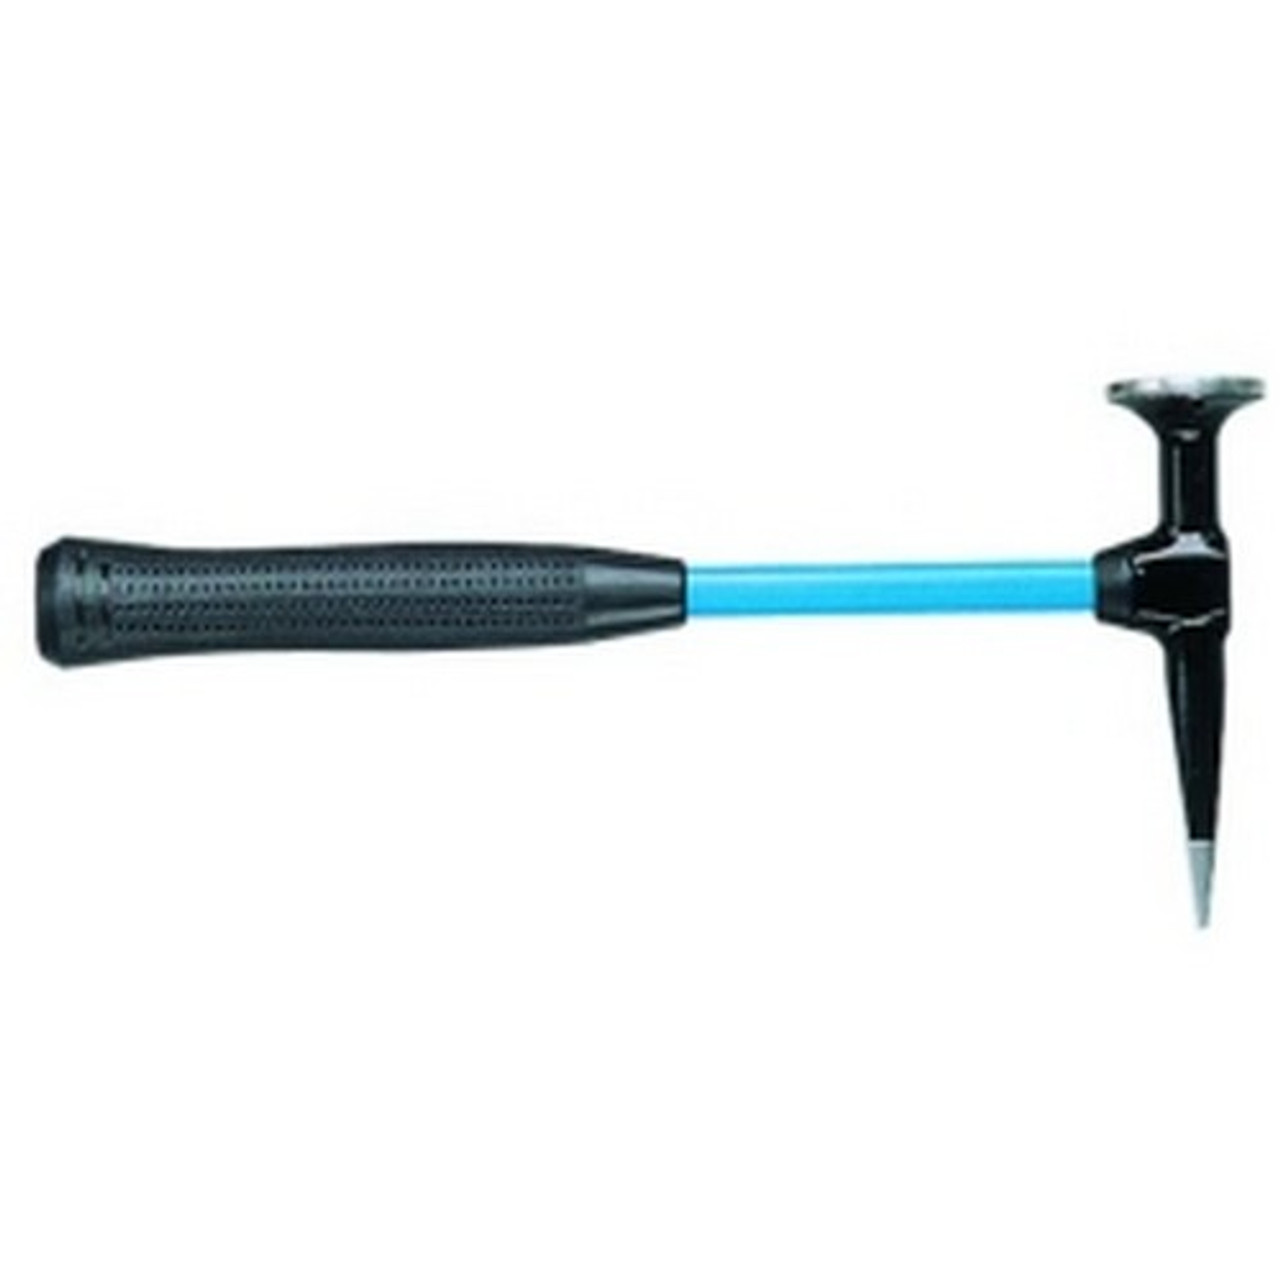 Martin 154SFG Round Face Vertical Chisel Shrinking Body Hammer with  Fiberglass Handle, 5-1 Overall Length by Martin 通販